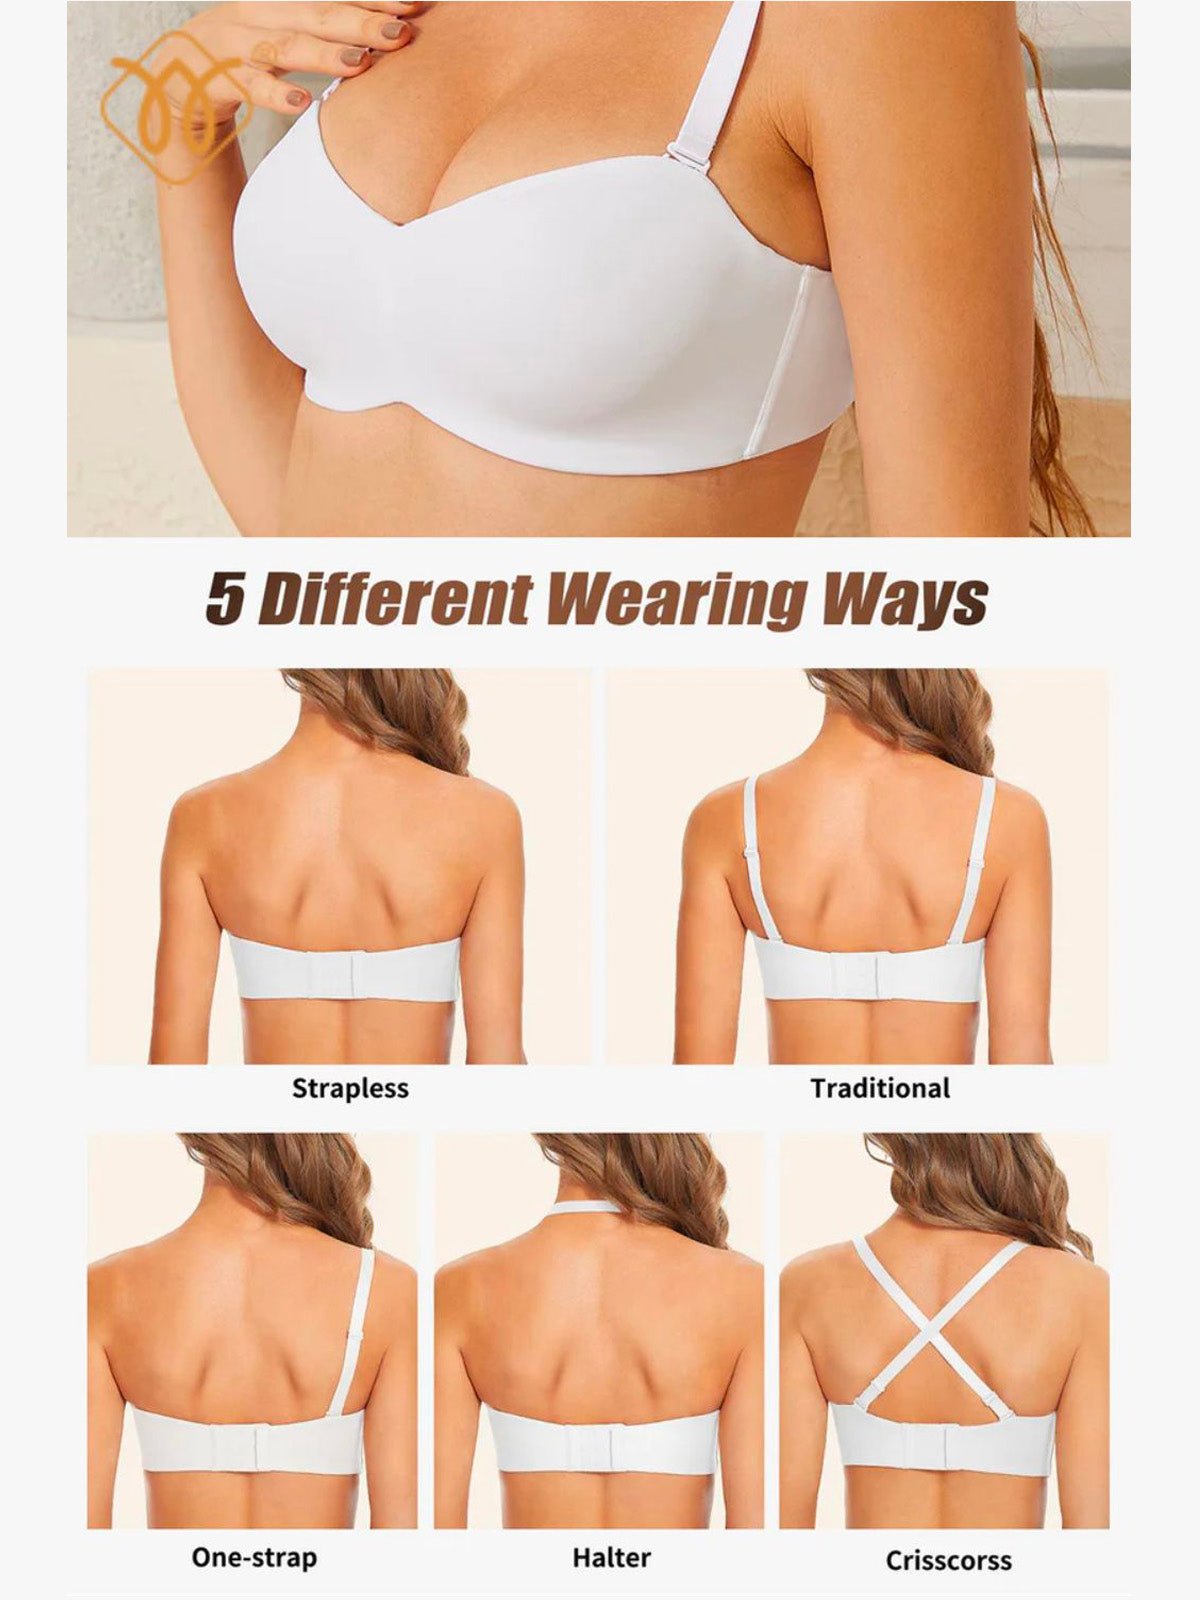 How to Select Strapless Bras According to Your Body's Fit – Vy's Closet